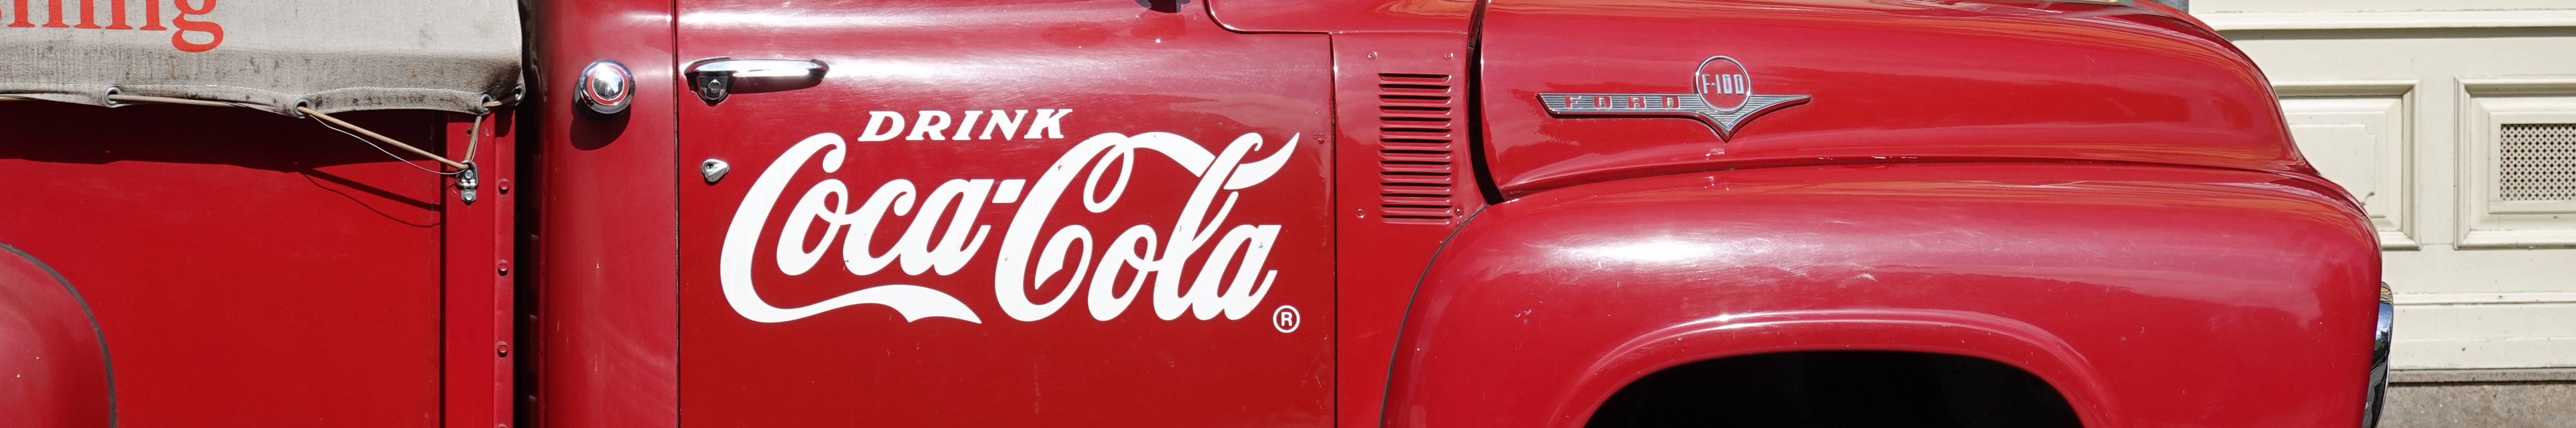 Coca-Cola is helping millions of people gain access to water, while also protecting wetlands